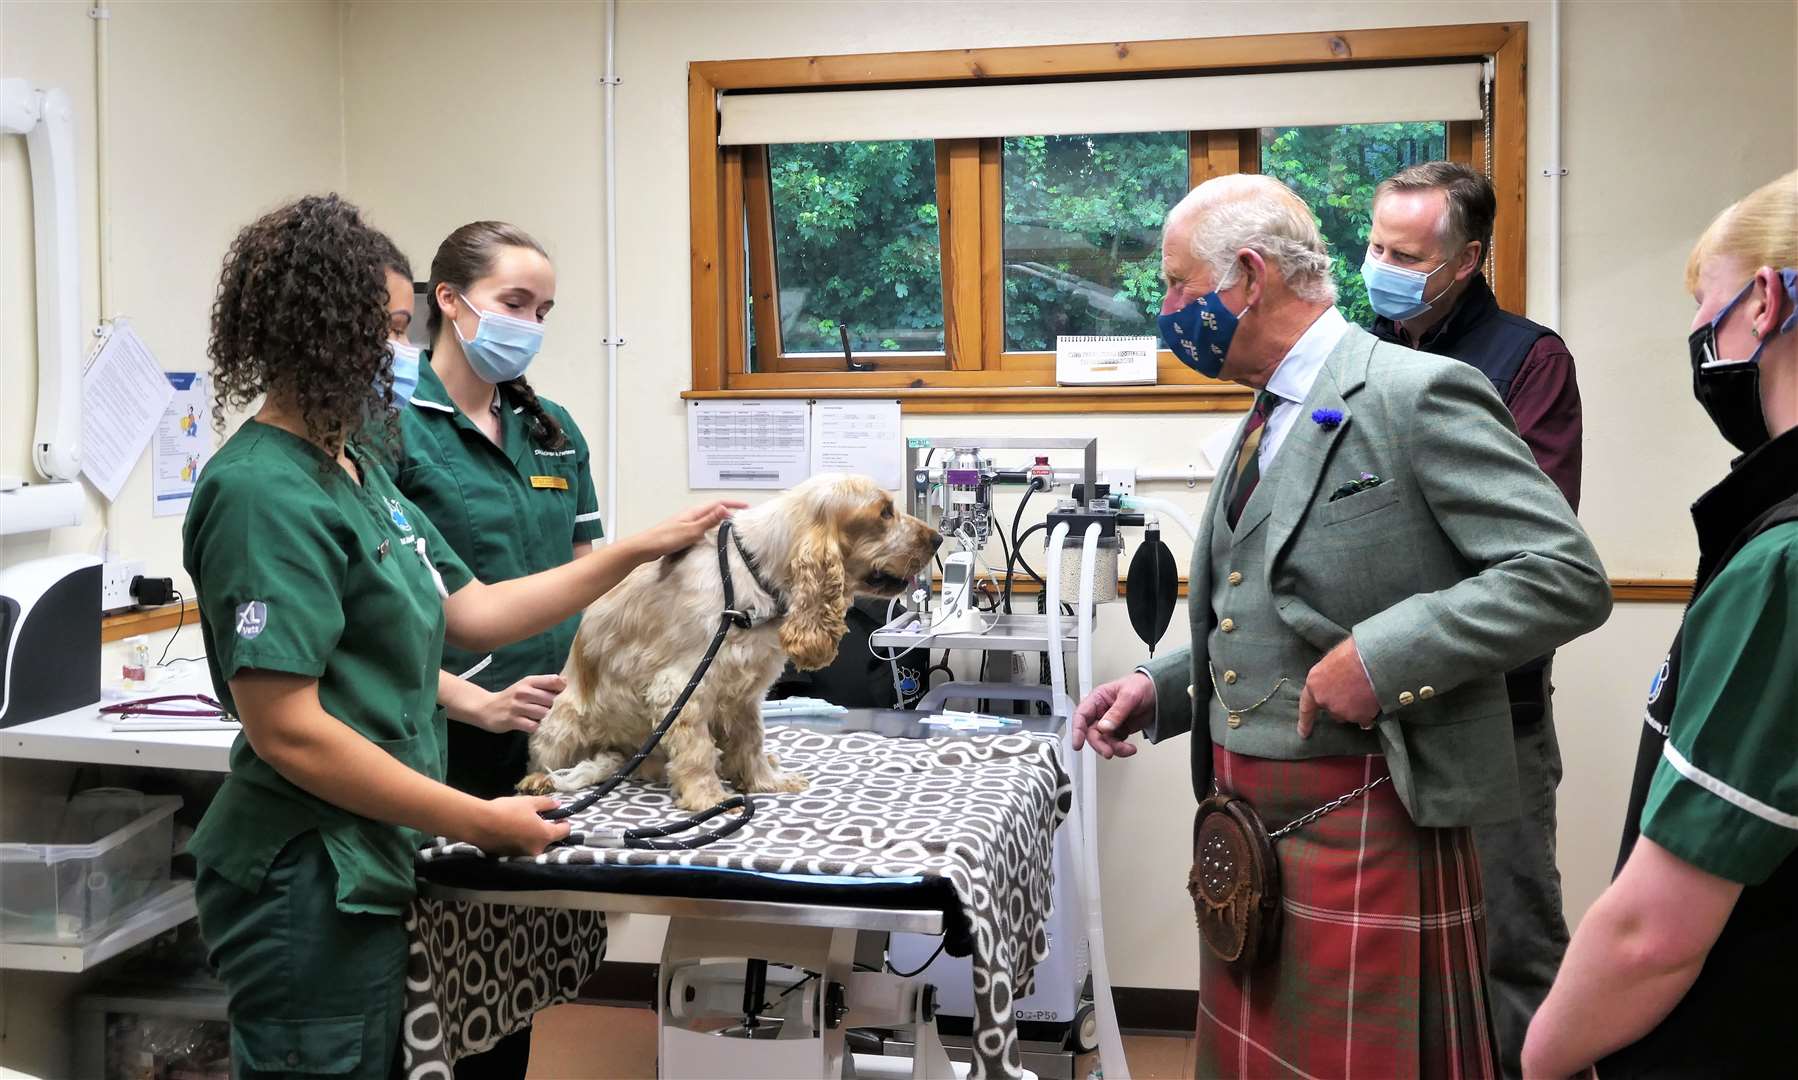 Exclusive pictures from the visit of HRH Prince Charles to Caithness